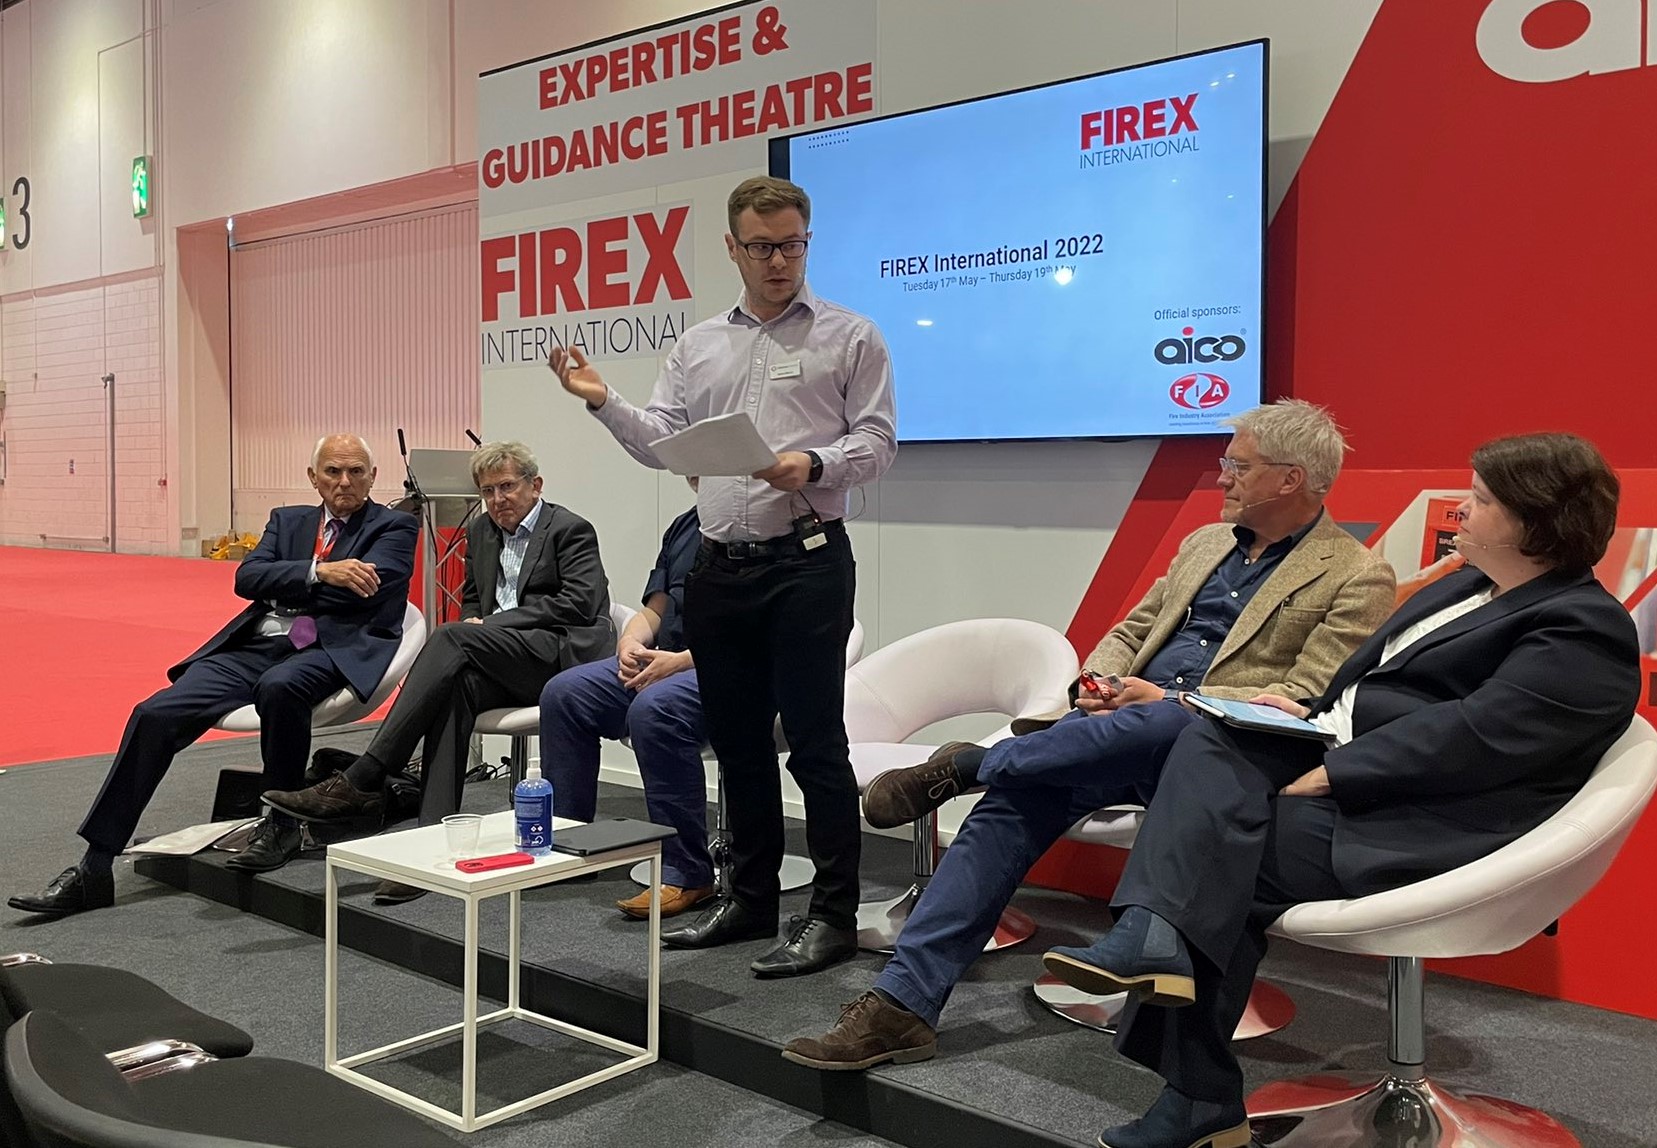 Panel of people ready to discuss a topic at the FIREX fire safety exhibition